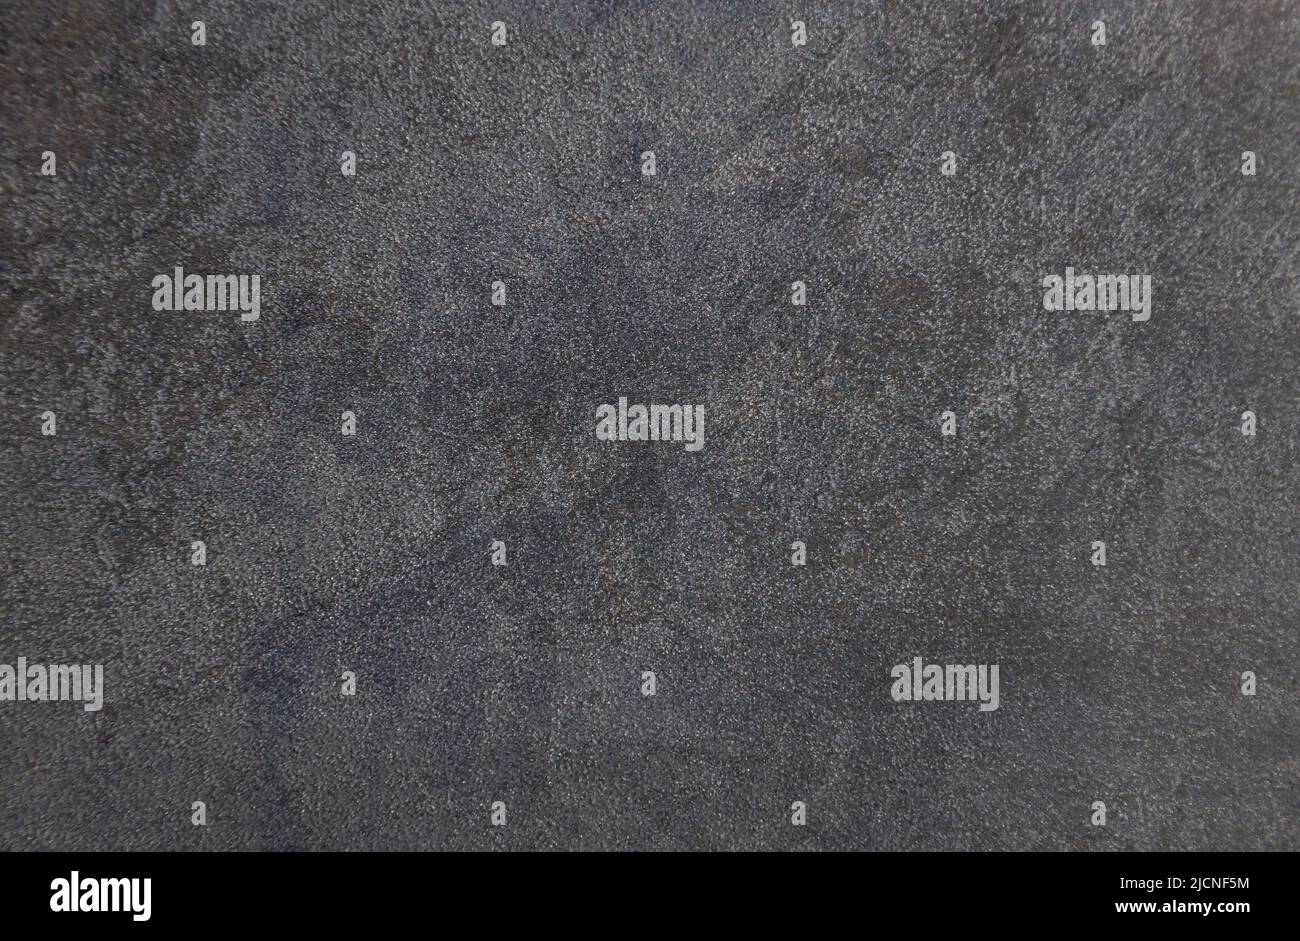 Dark gray concrete wall texture. Design on cement and concrete textures for the background. Stock Photo